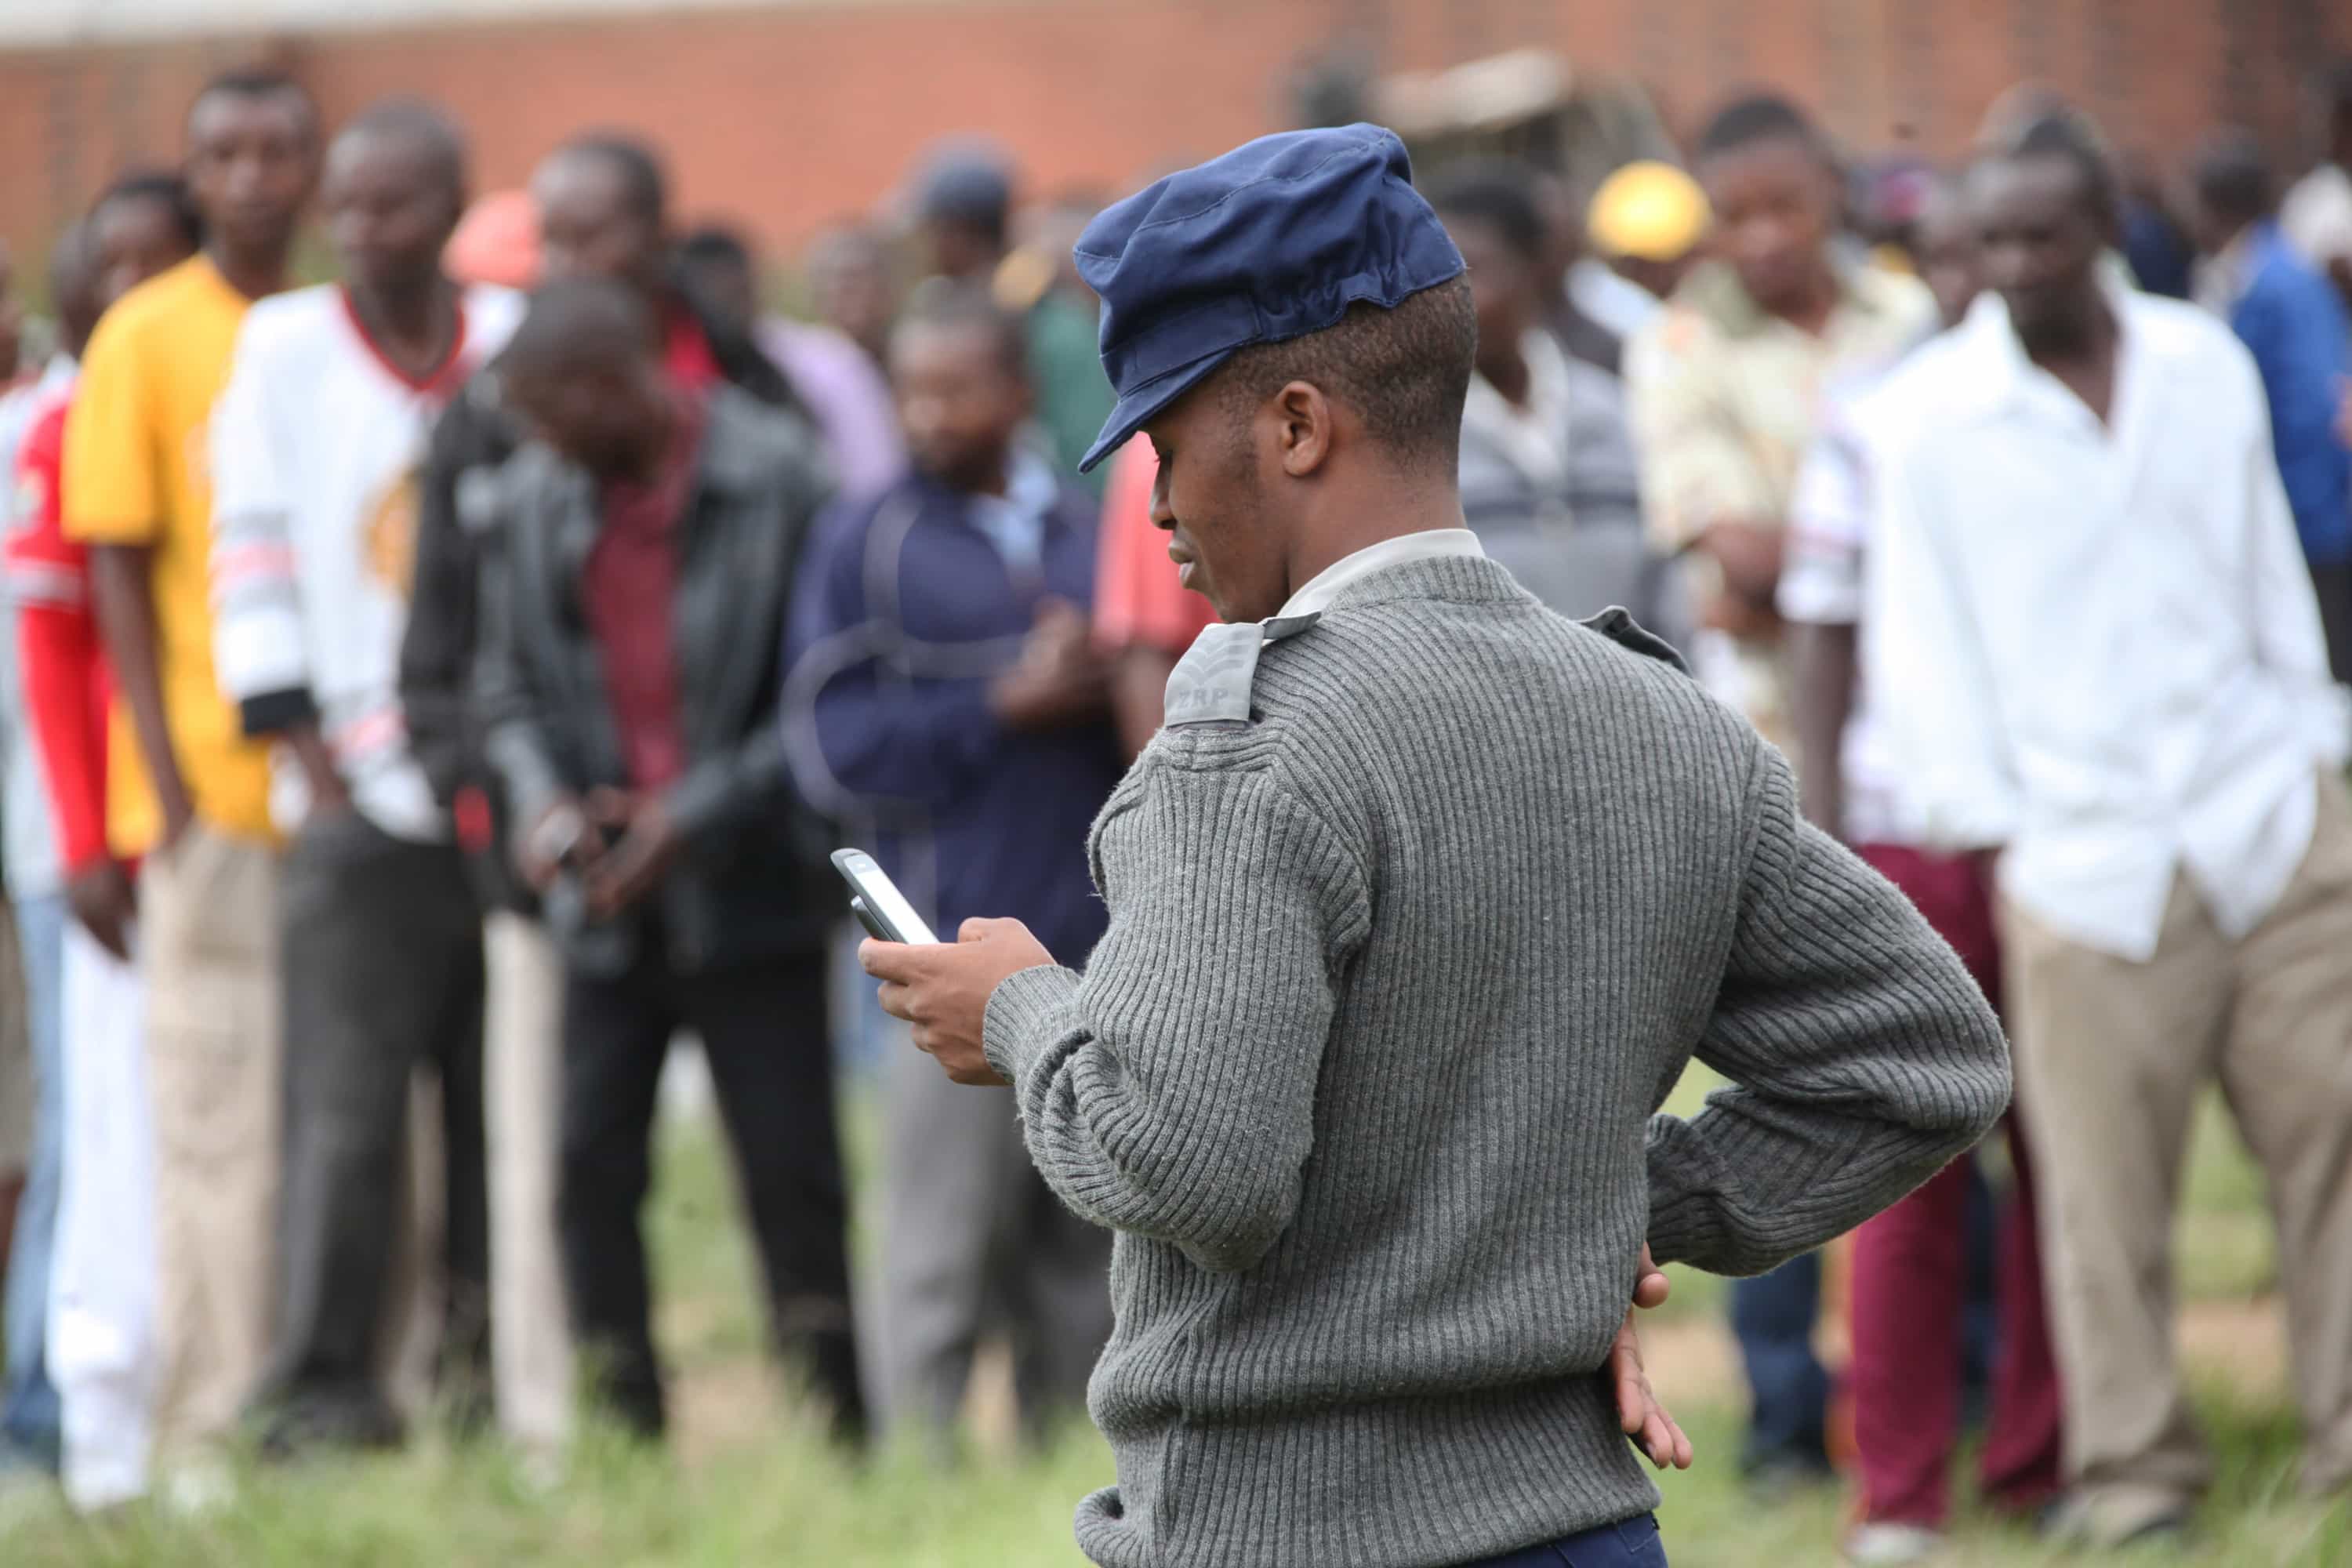 A police officer chats on a mobile phone at a polling station during a referendum in Harare, Zimbabwe, 16 March 2013, AP Photo/Tsvangirayi Mukwazhi